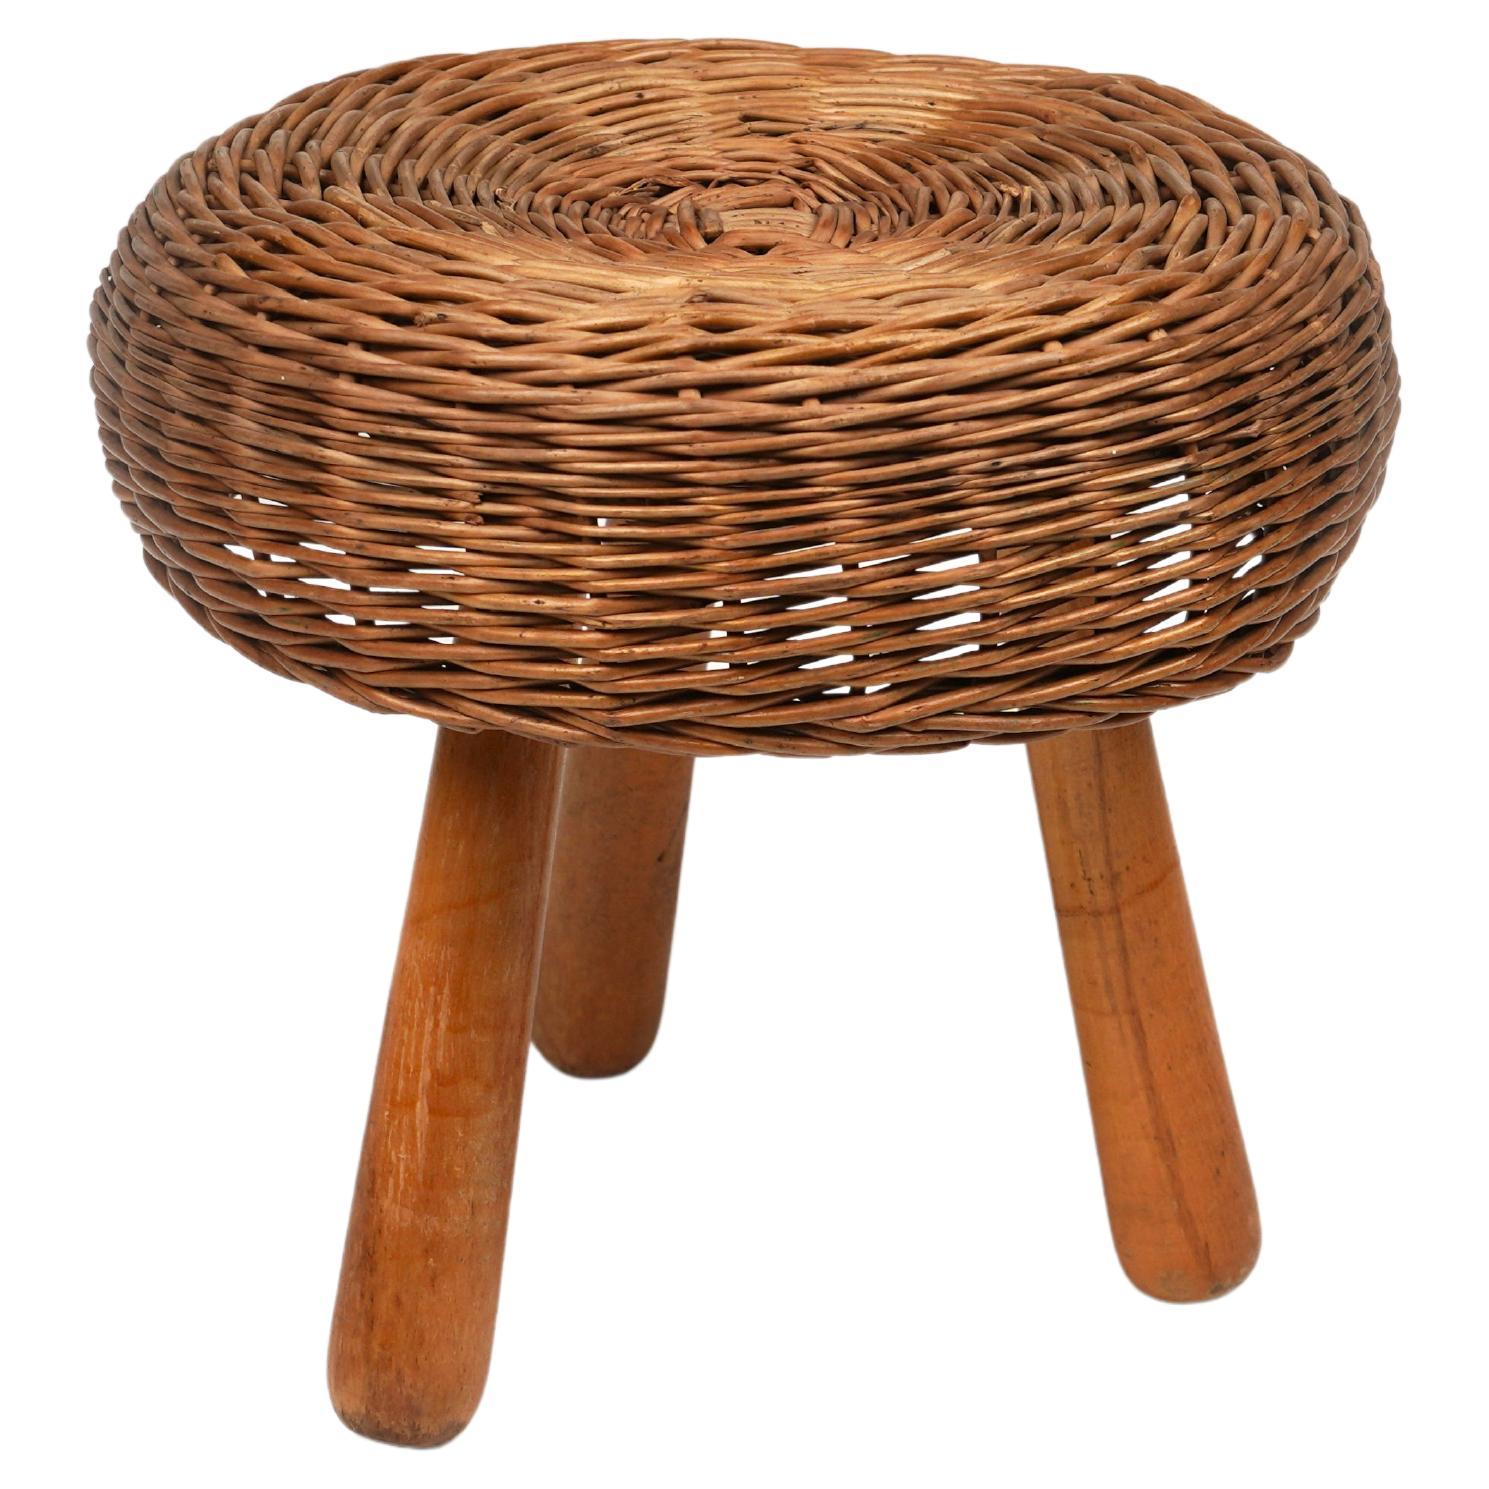 Midcentury Wicker and Wood Tripod Stool by Tony Paul, United States, 1950s In Good Condition For Sale In Rome, IT